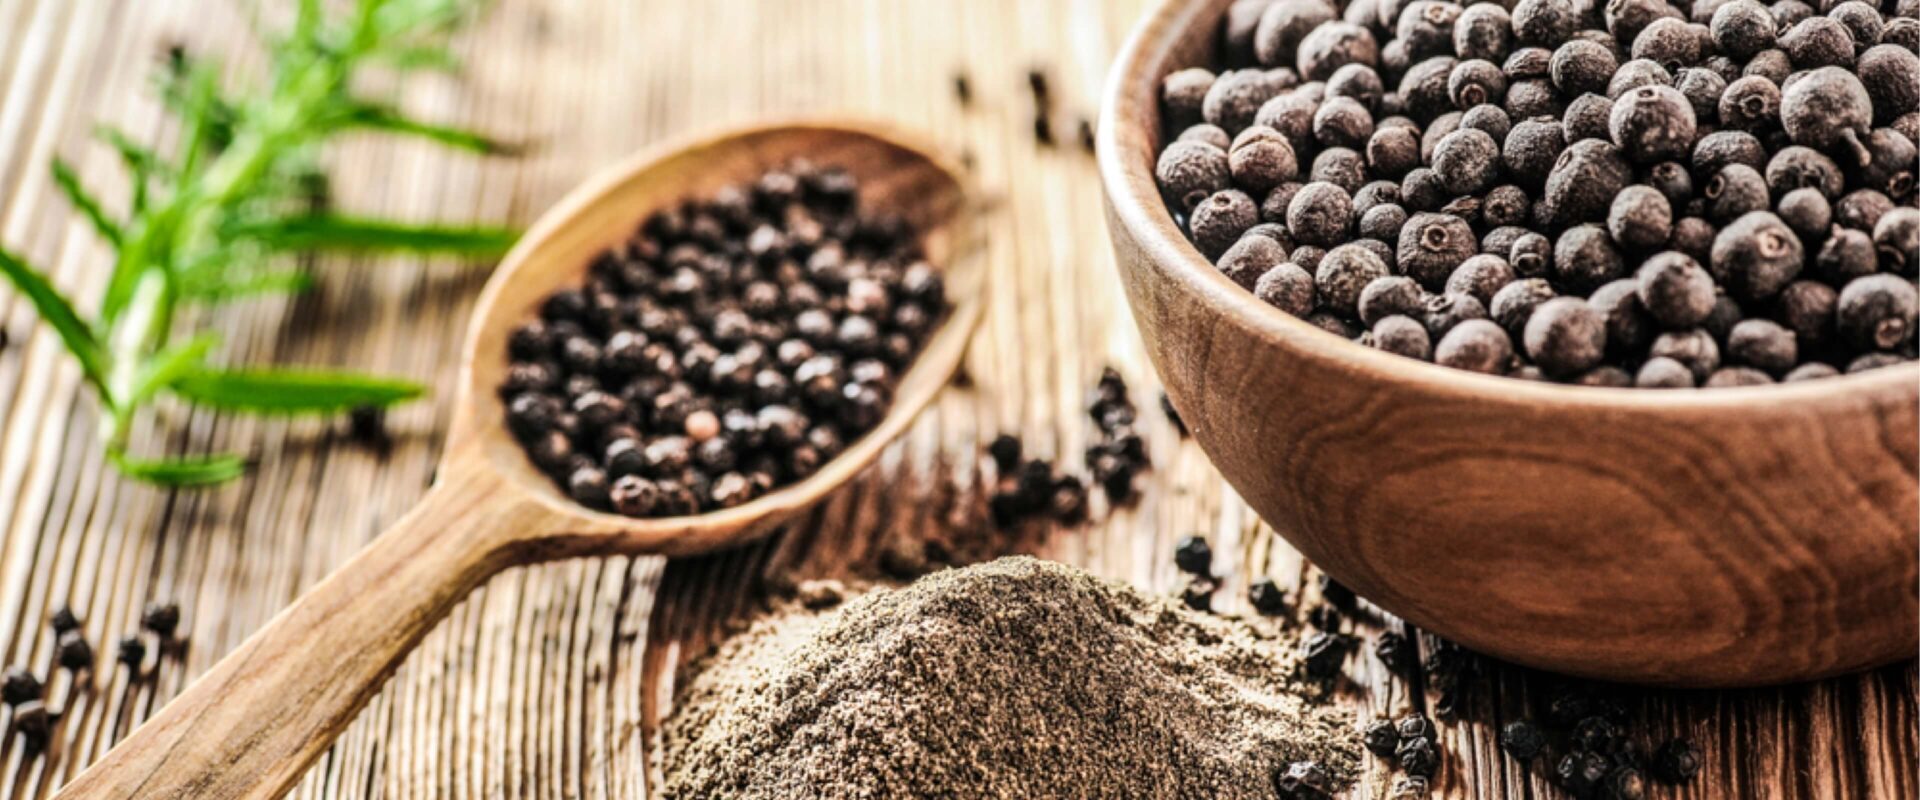 Black Pepper Extract for Better Absorption of Your Supplement Routine